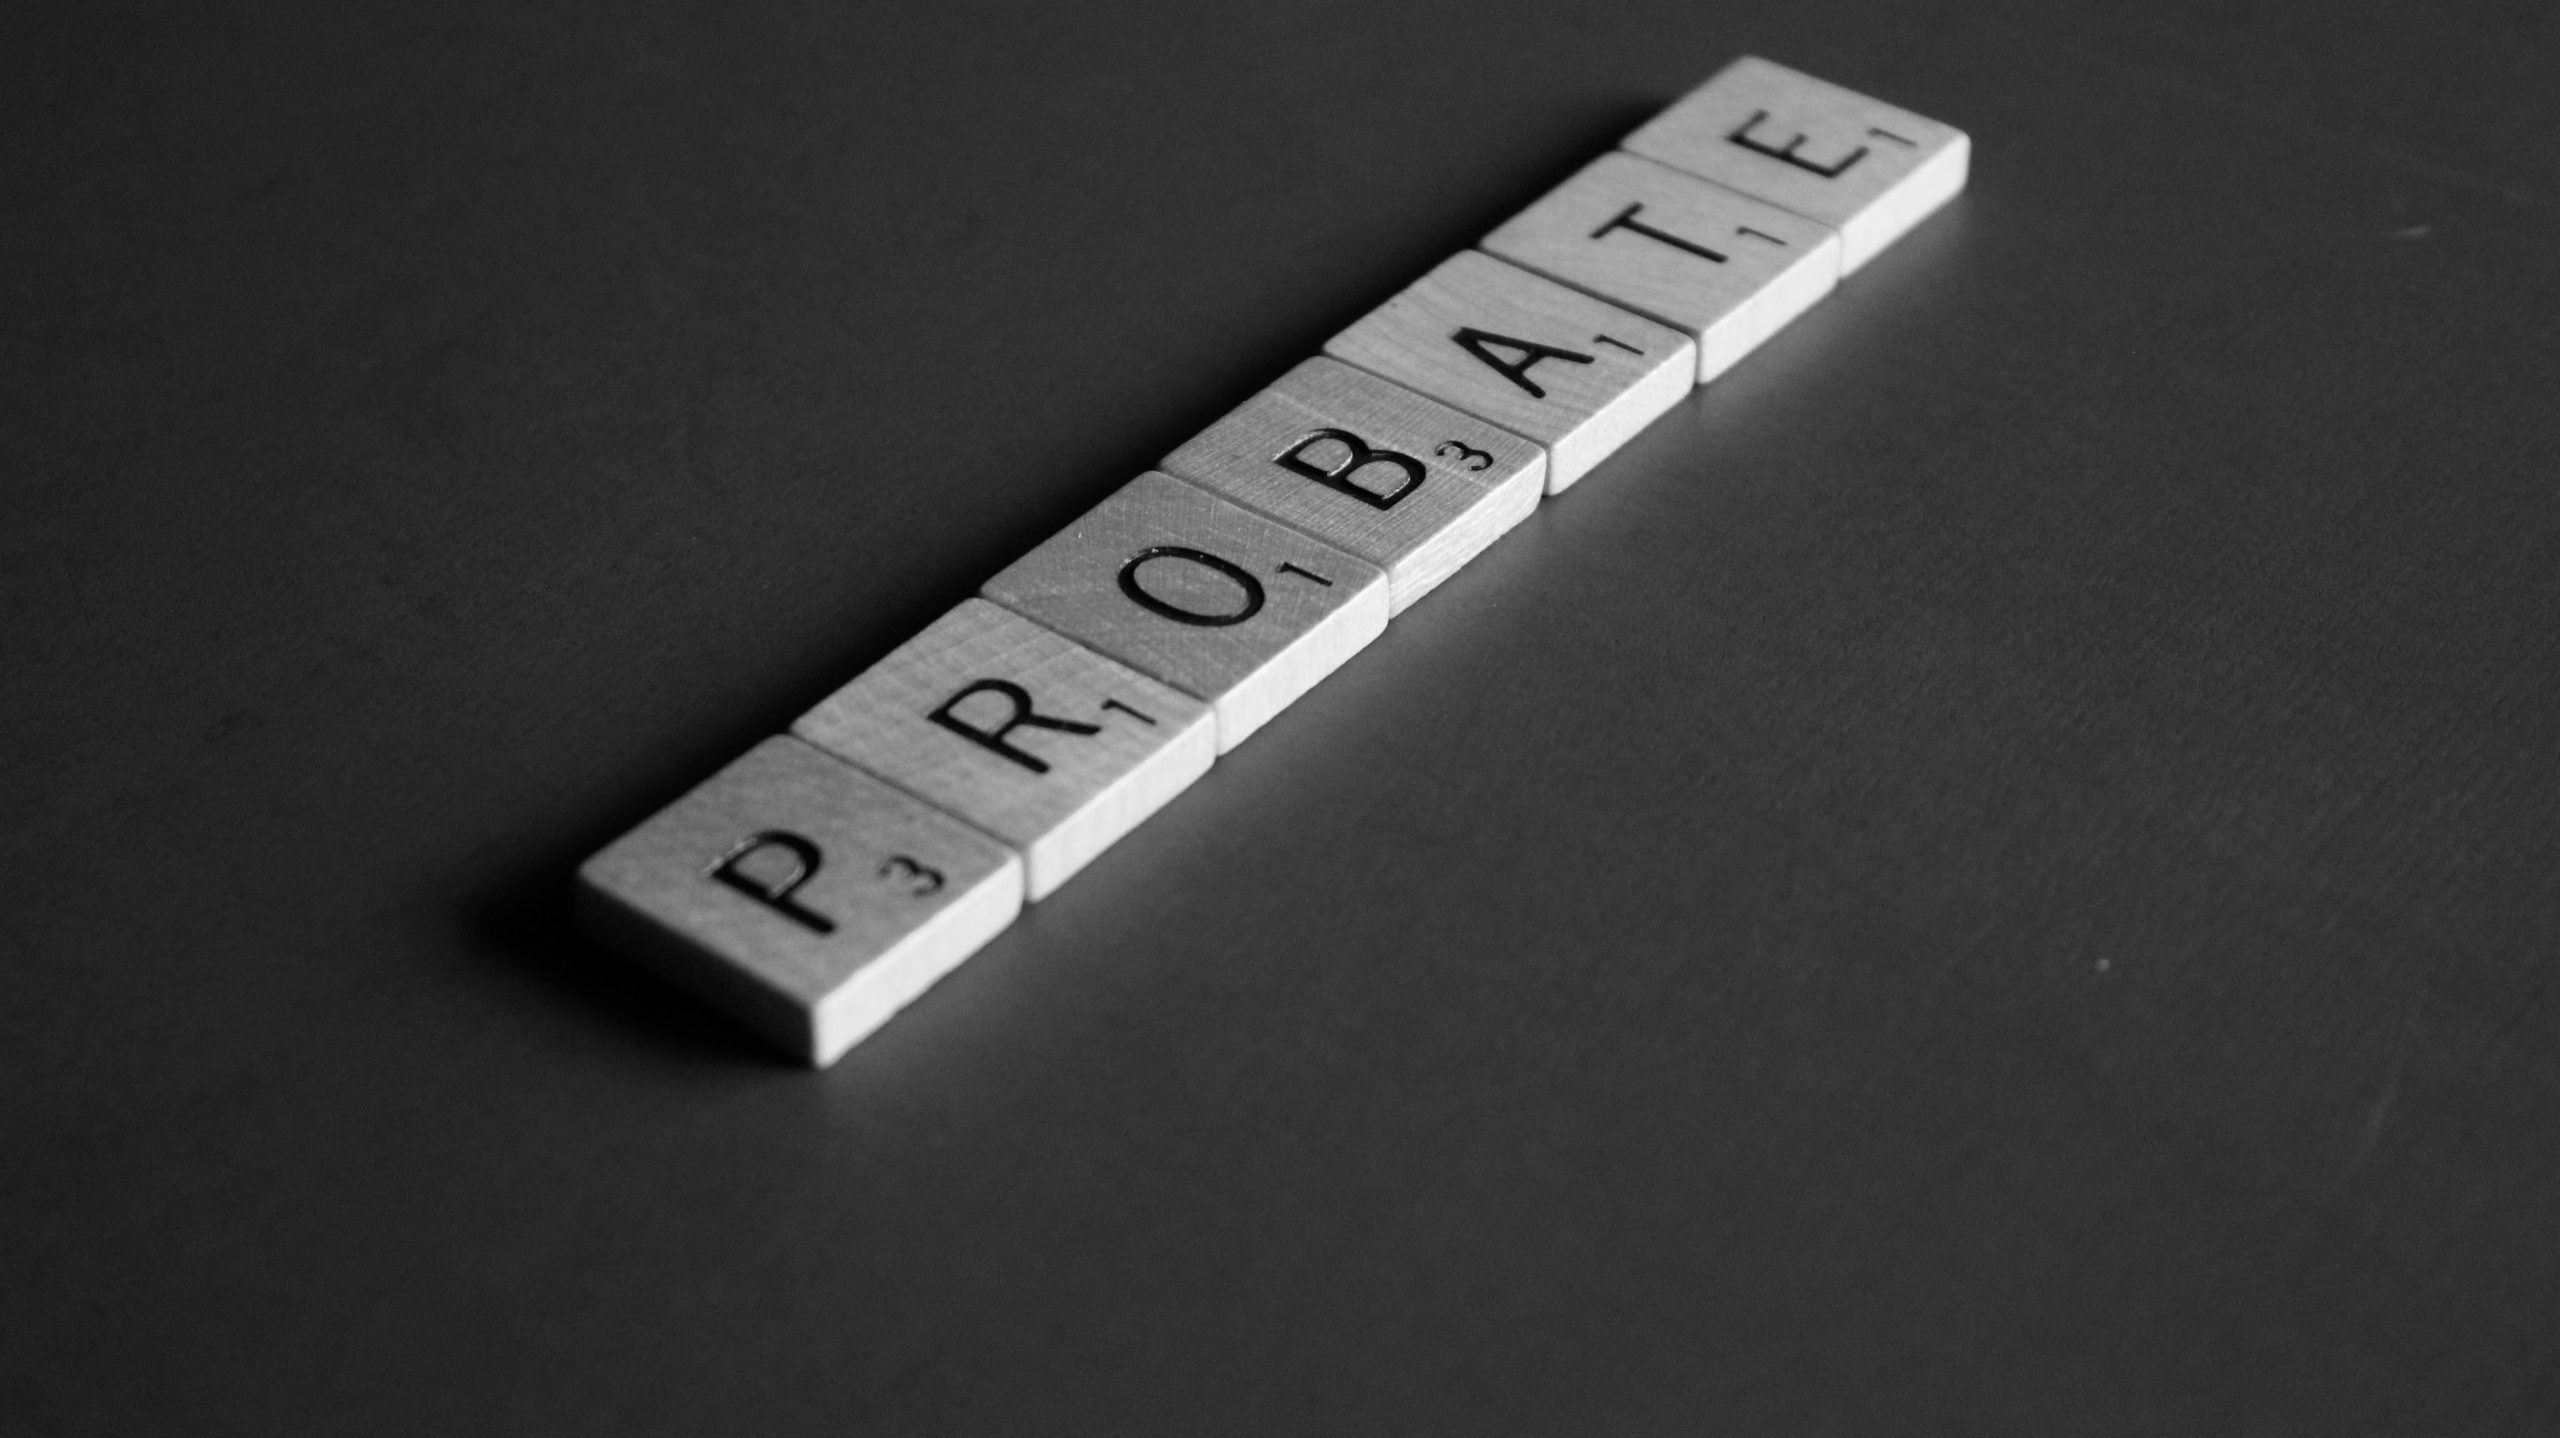 To Probate a Will